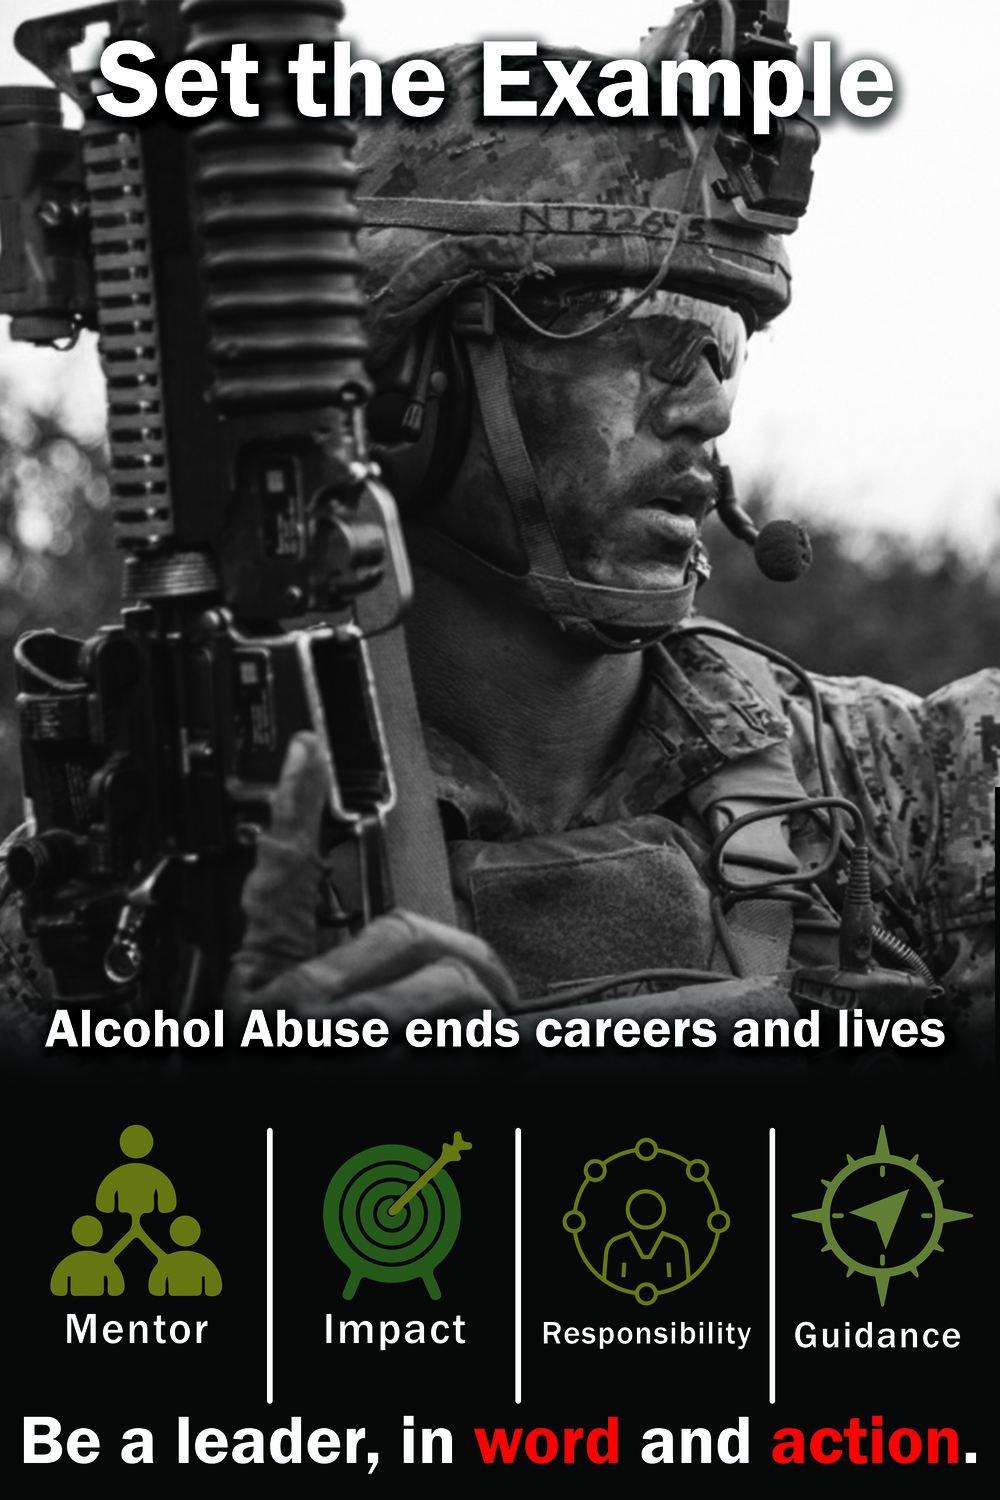 1st Marine Division Alcohol Abuse Campaign - Set the Example